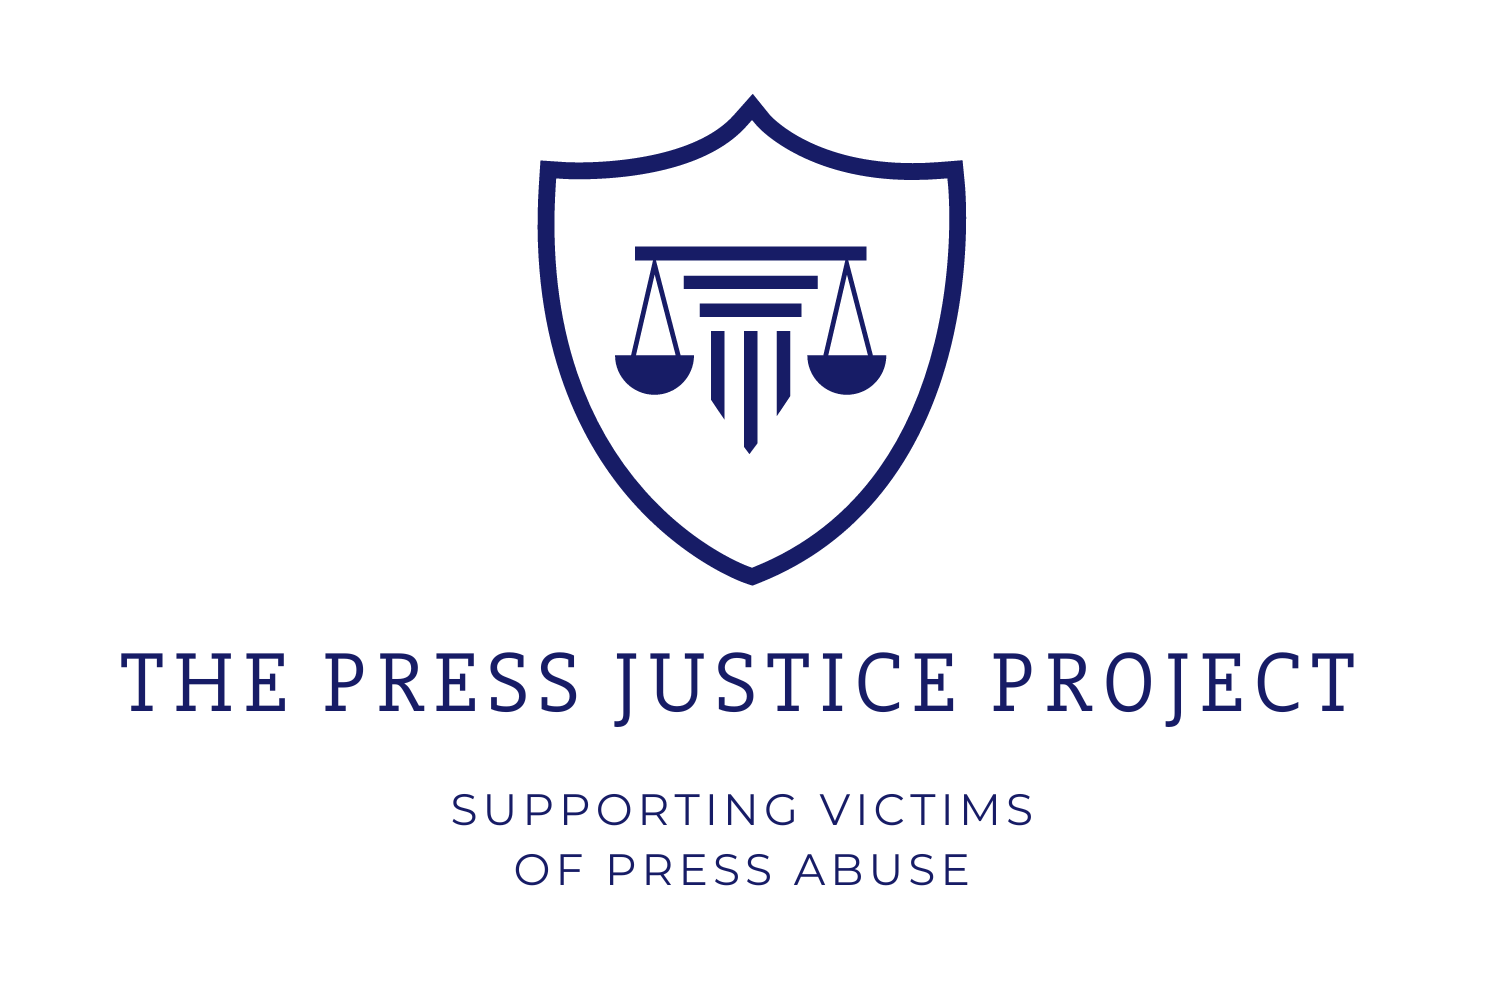 The Press Justice Project